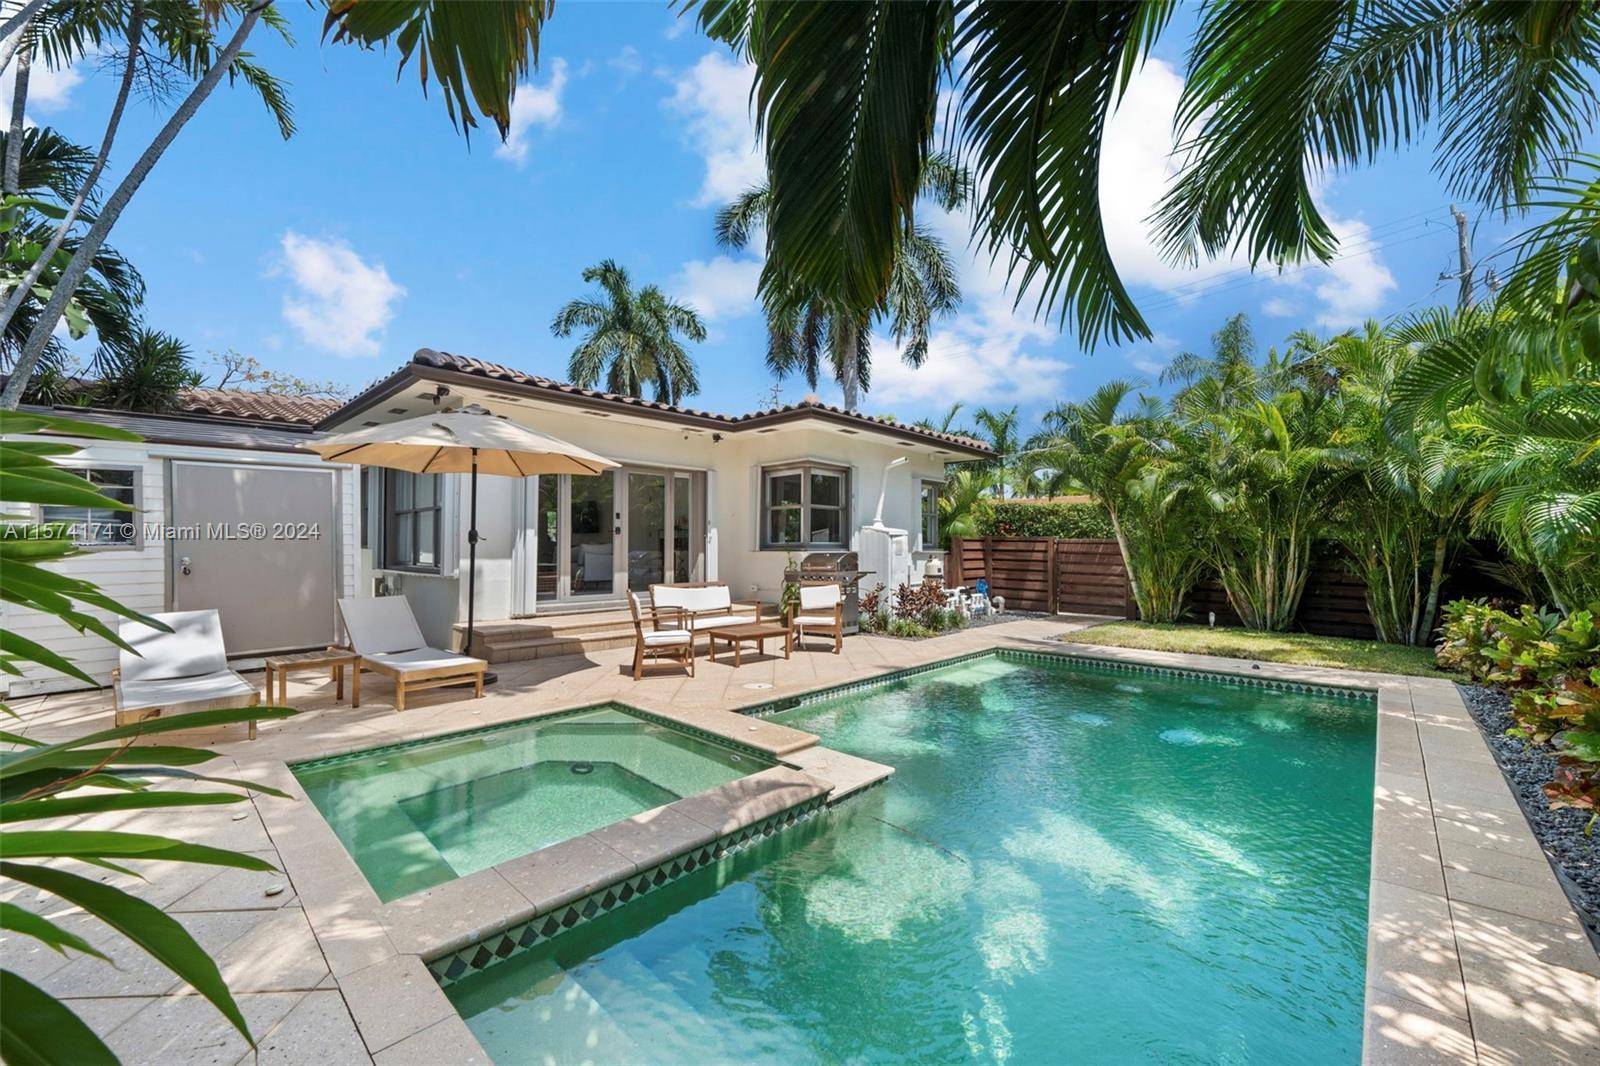 Beautifully remodeled 3 bedrooms and 2 bathrooms corner Villa with private pool and jacuzzi, BBQ area, perfect to hang out with your friends and family.